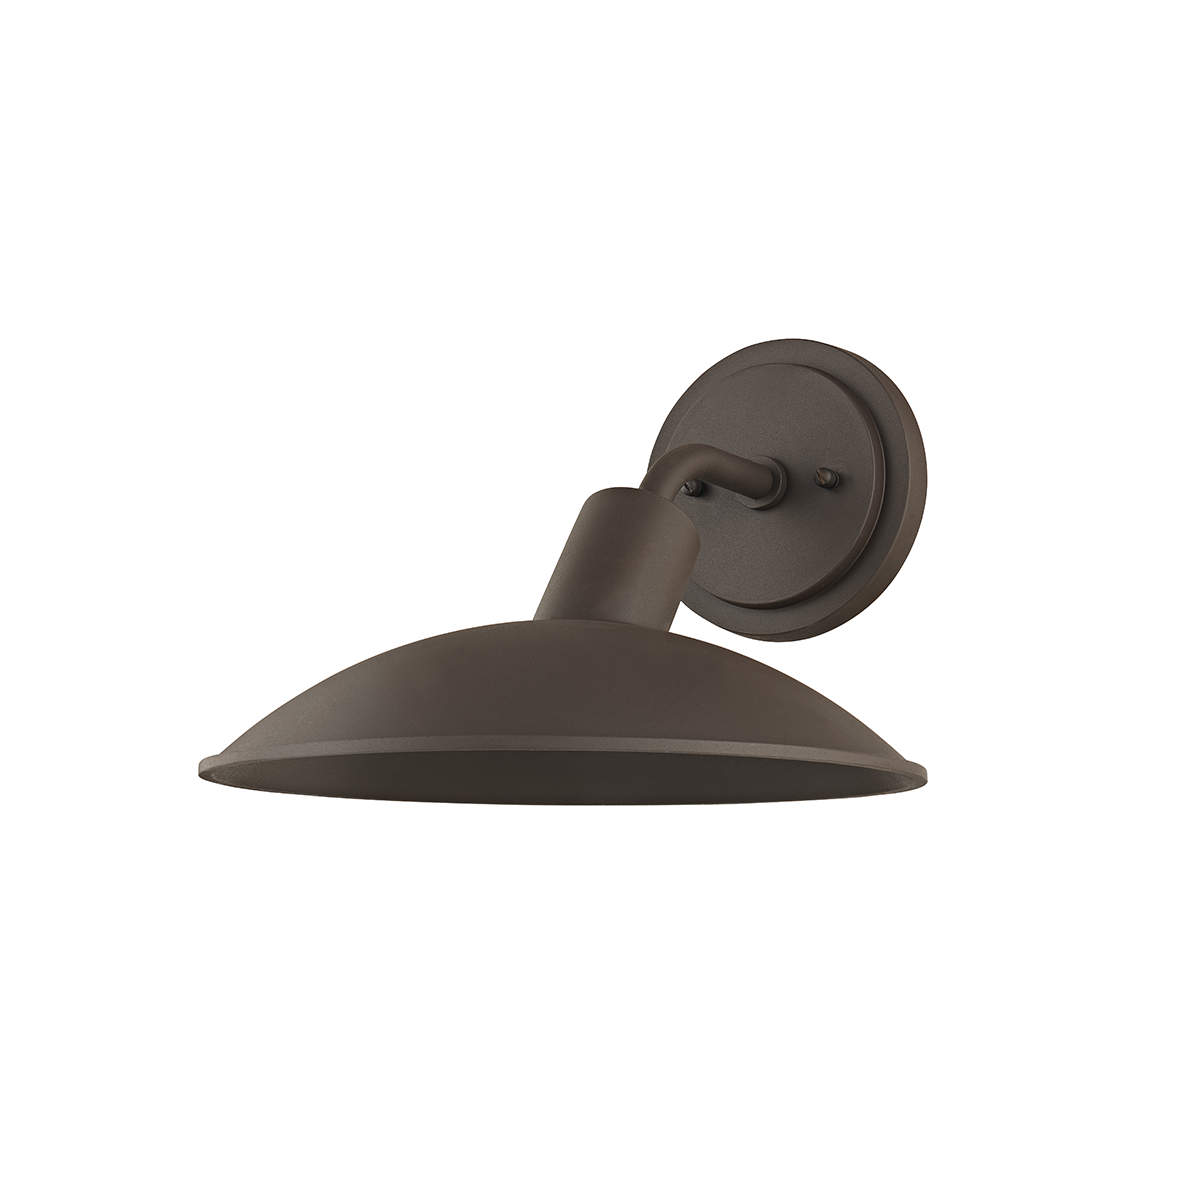 Troy OTIS 1 LIGHT SMALL EXTERIOR WALL SCONCE B8812 Outdoor l Wall Troy Lighting TEXTURED BRONZE  